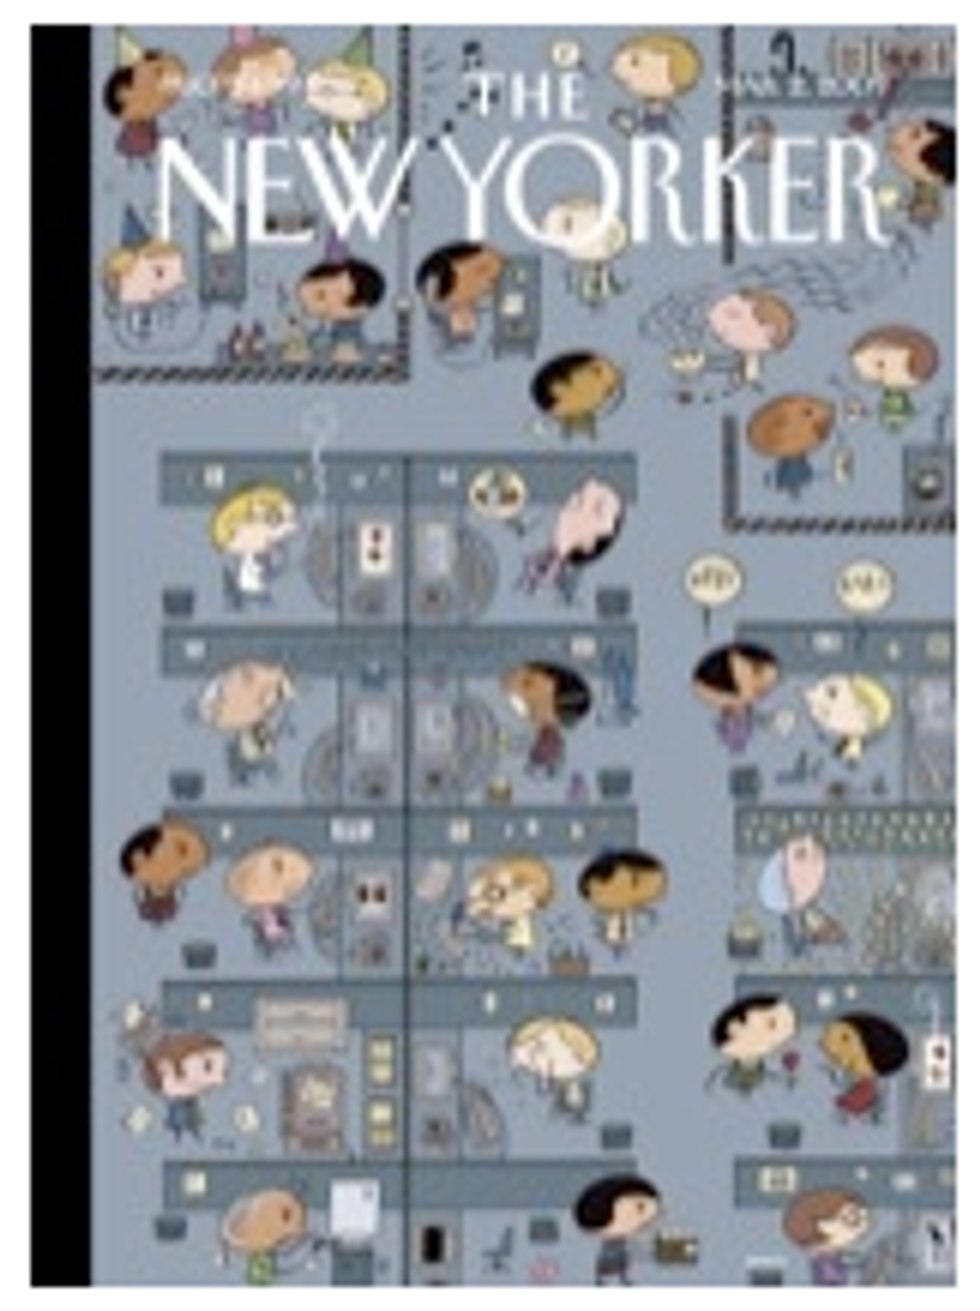 A Discussion About The New Yorker, Entirely Devoid Of He Who Must Not Be Fact-Checked